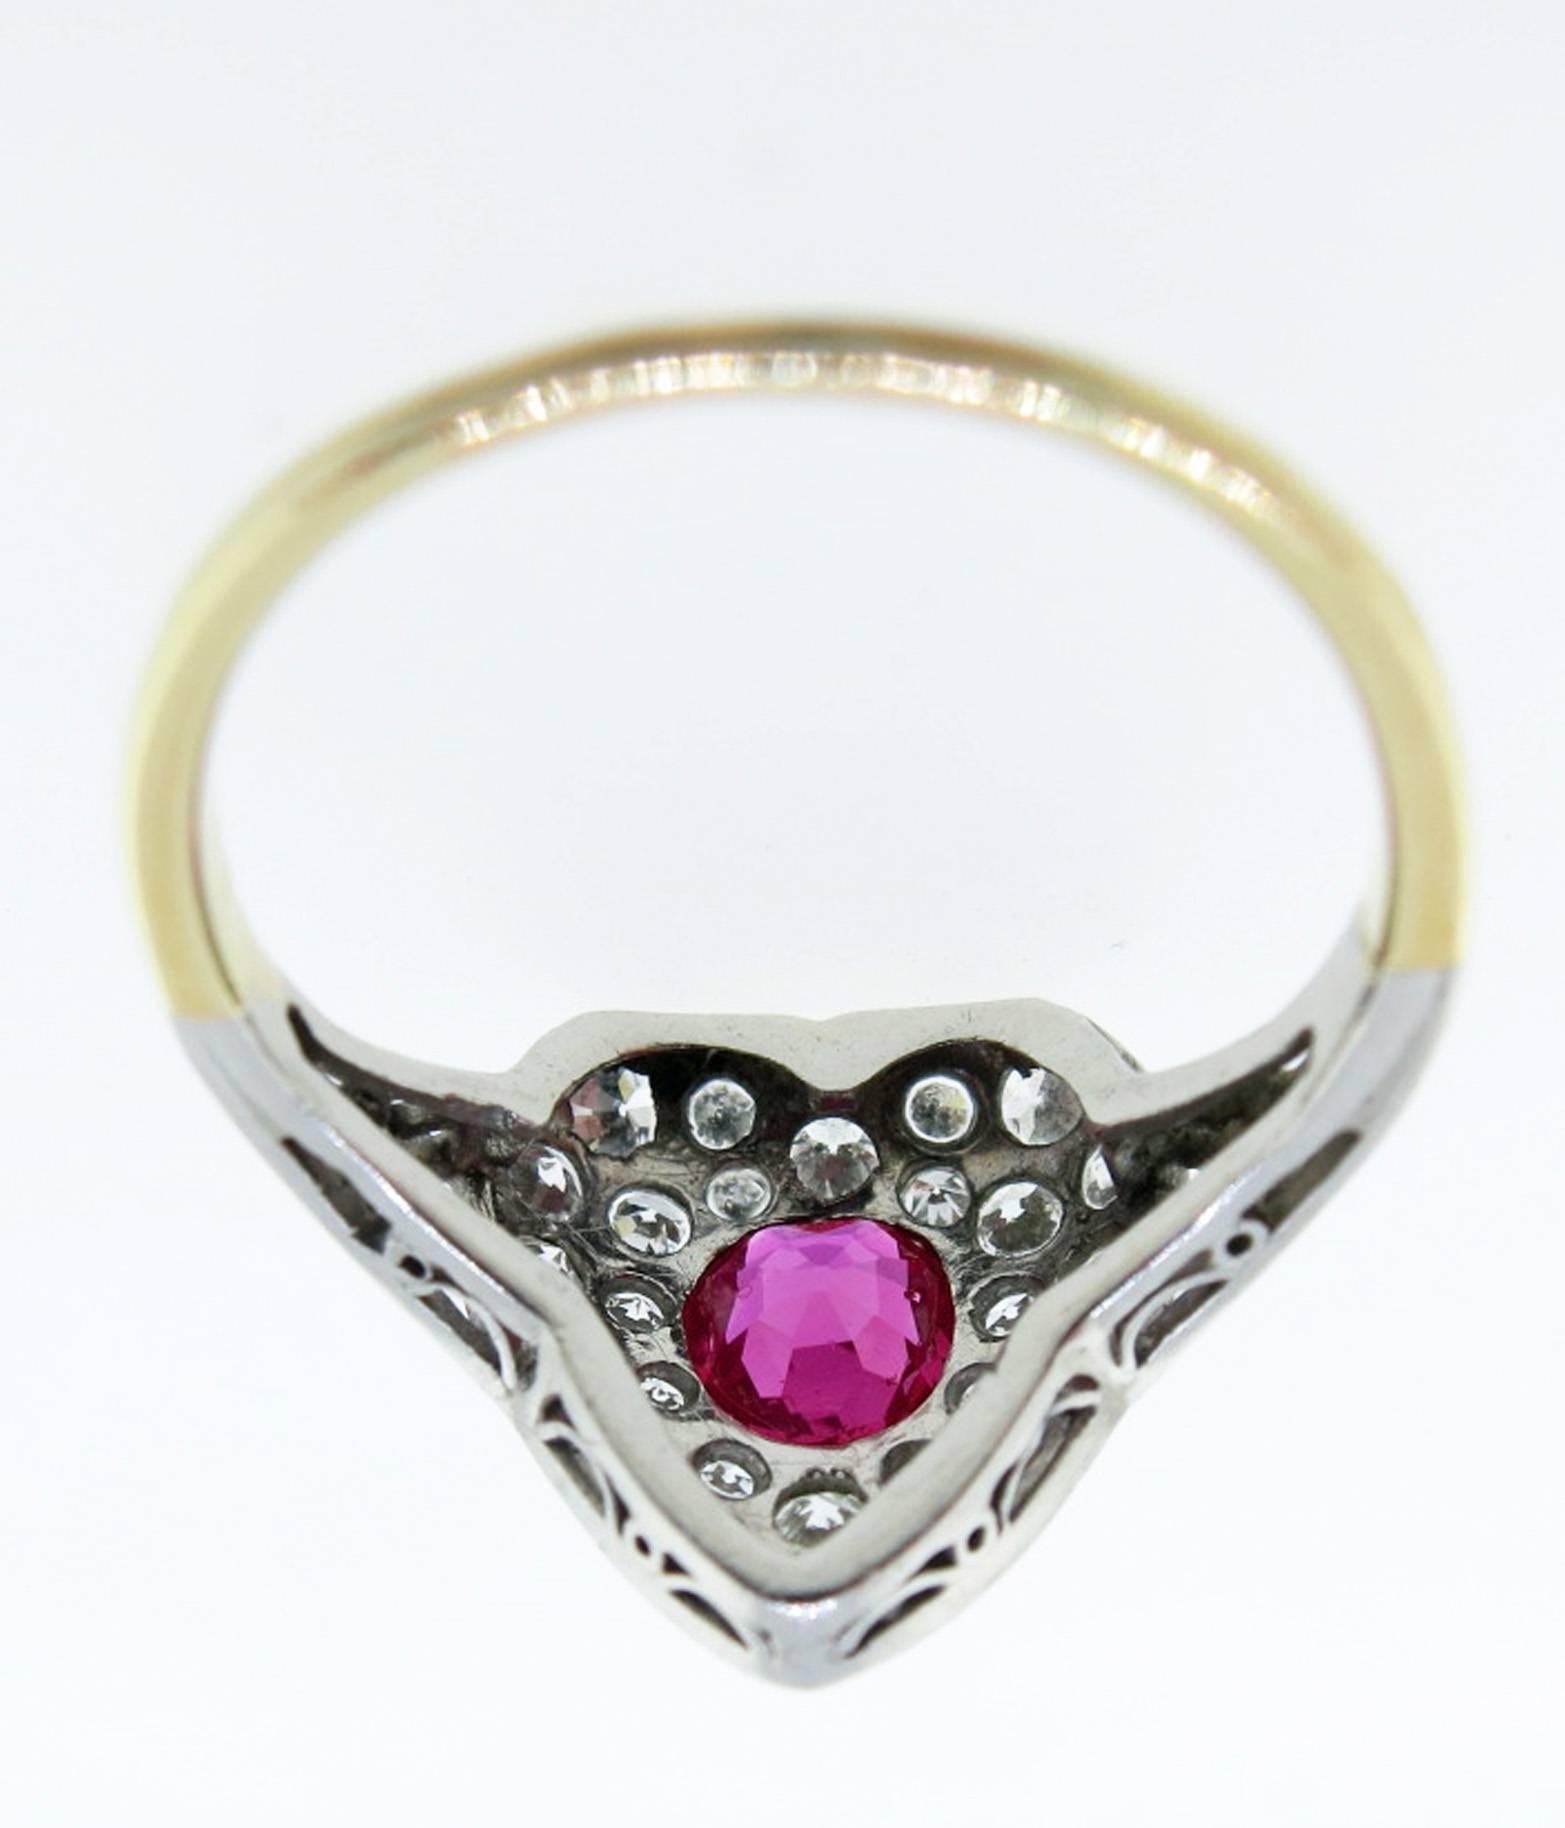 Romantic platinum top and 18kt. yellow gold shank heart shape ring circa 1910. The center is set with a gem color natural ruby weighing approx .60cts. surrounded with 27 old European cut diamonds totaling approx .70cts. The ring is size 4 1/4 and